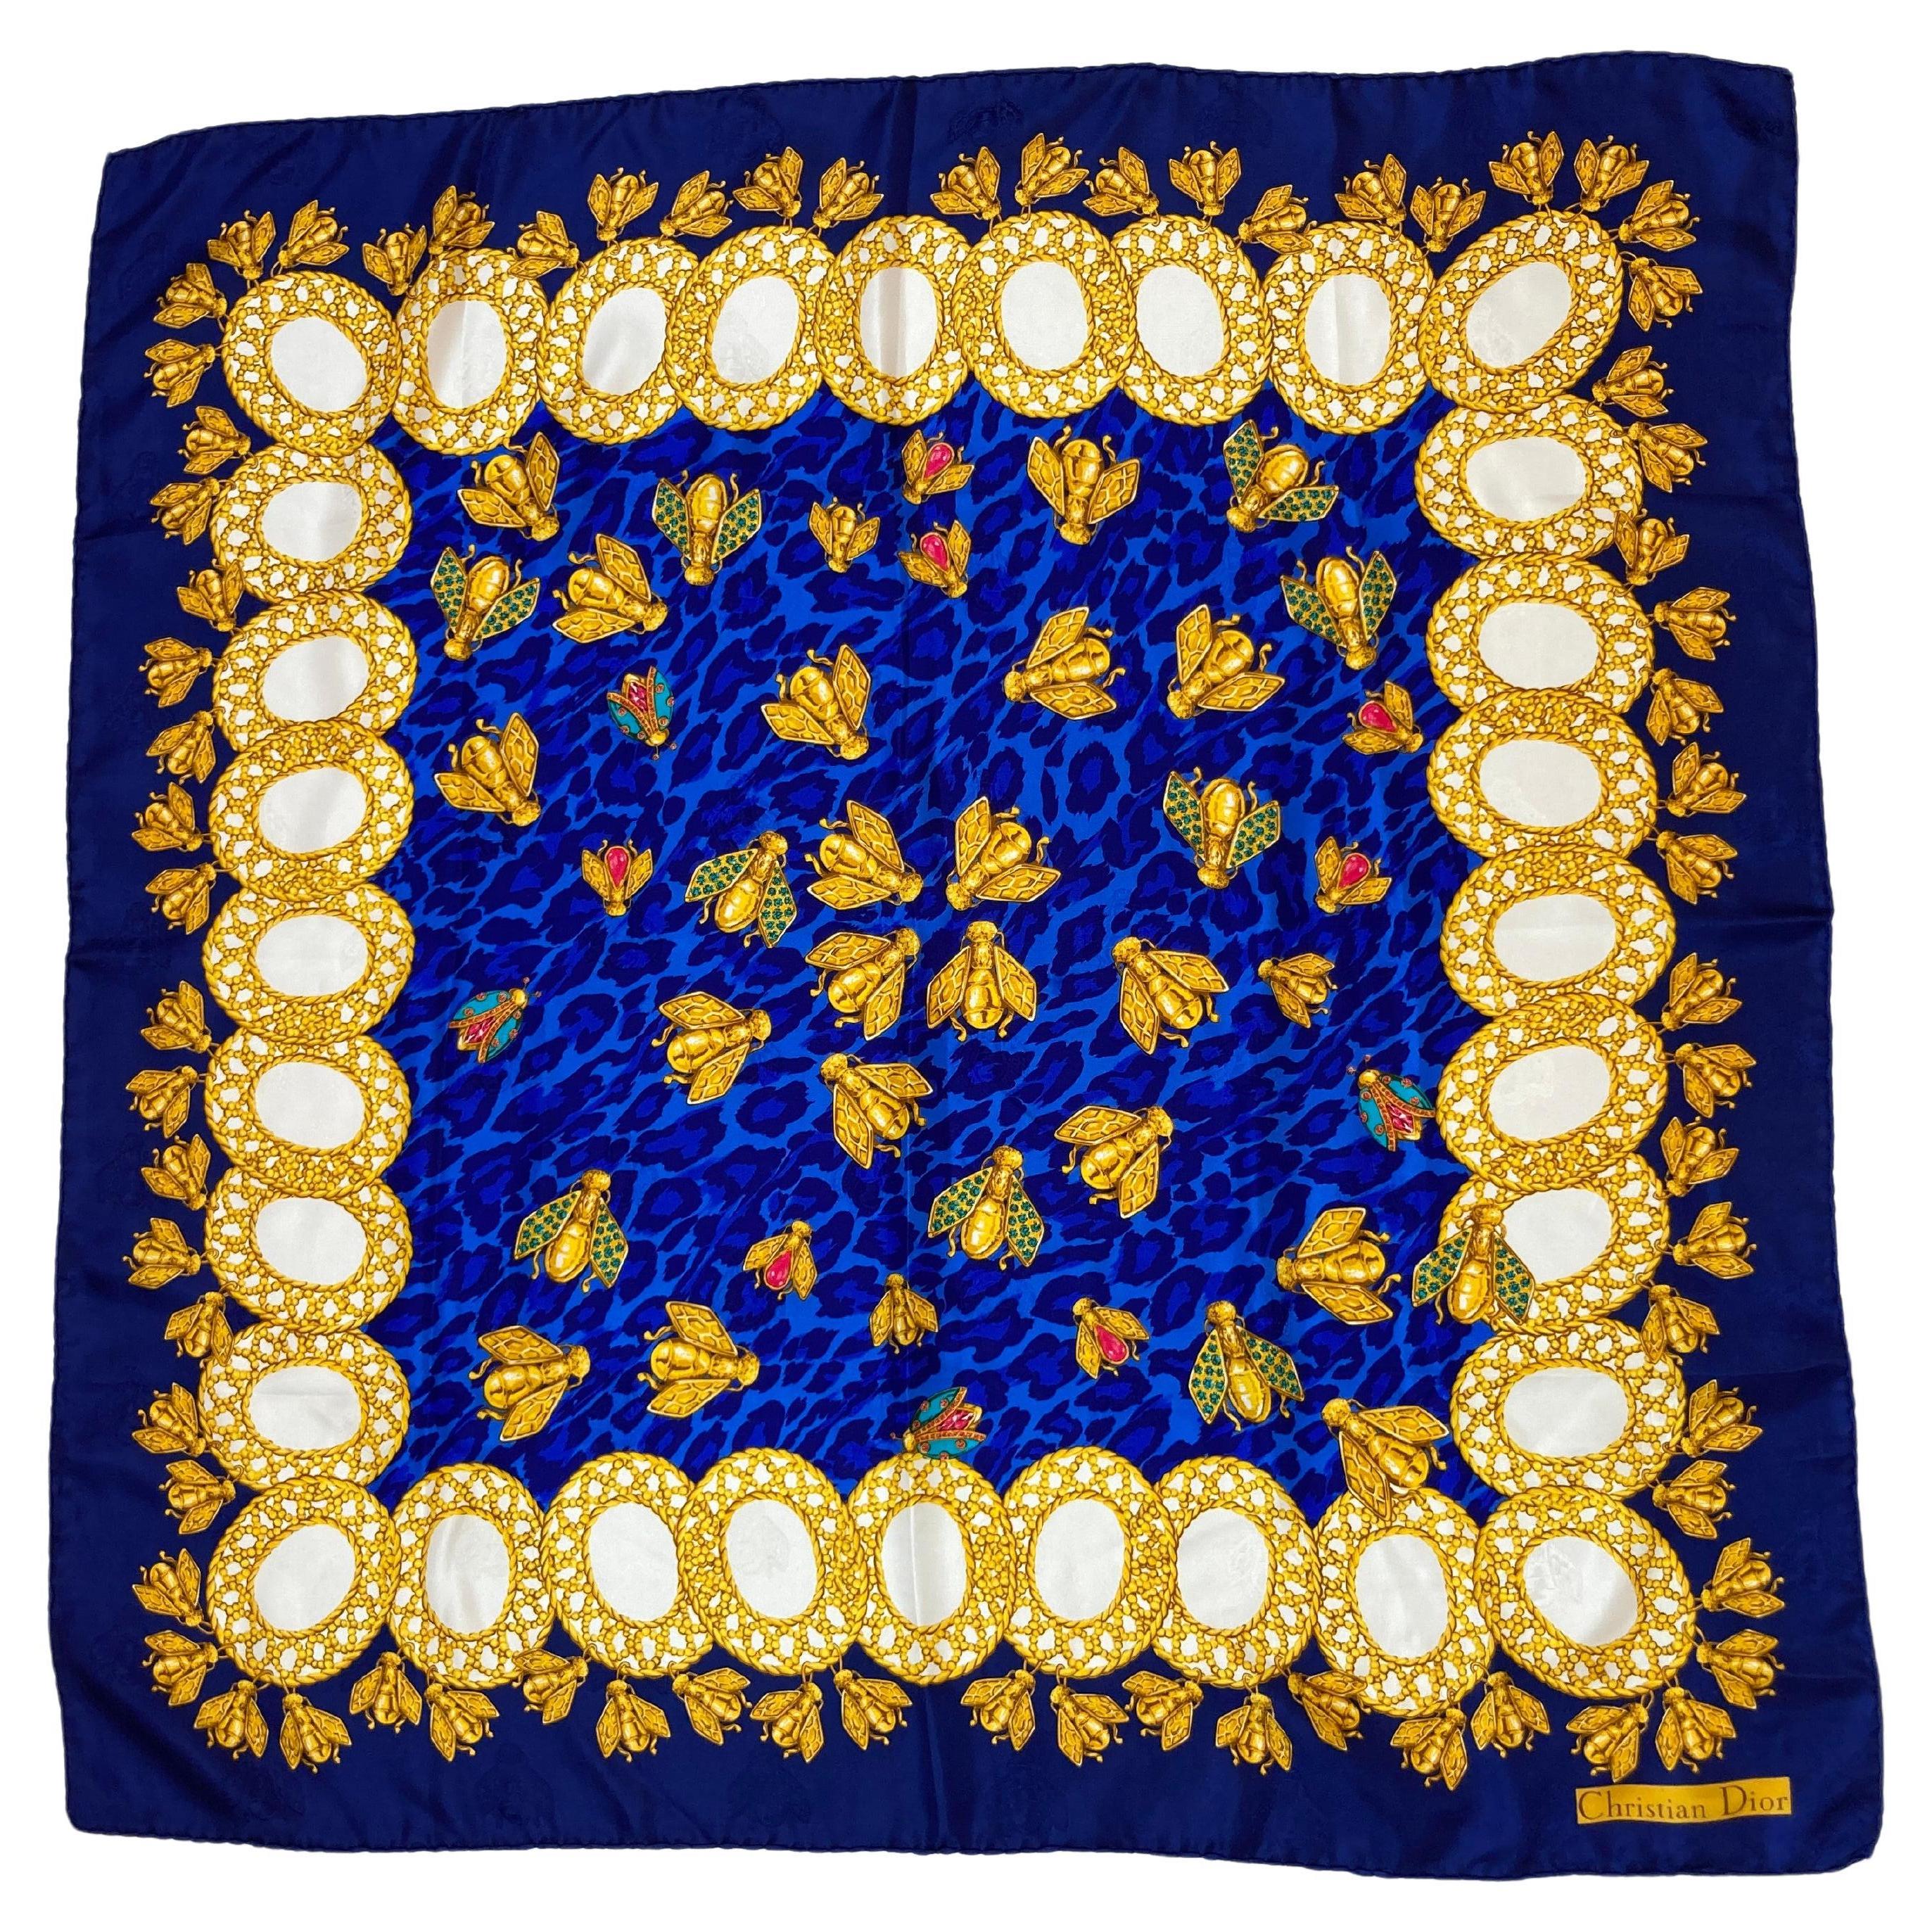 Christian Dior Hand Rolled Silk Scarf.
1990s CHRISTIAN DIOR Silk vintage scarf blue and gold.
This is a wonderful luxury silk scarf, the colors are a mix of royal blue, gold, red, white.
The theme is royal bees, with bees in gold and jeweled colors